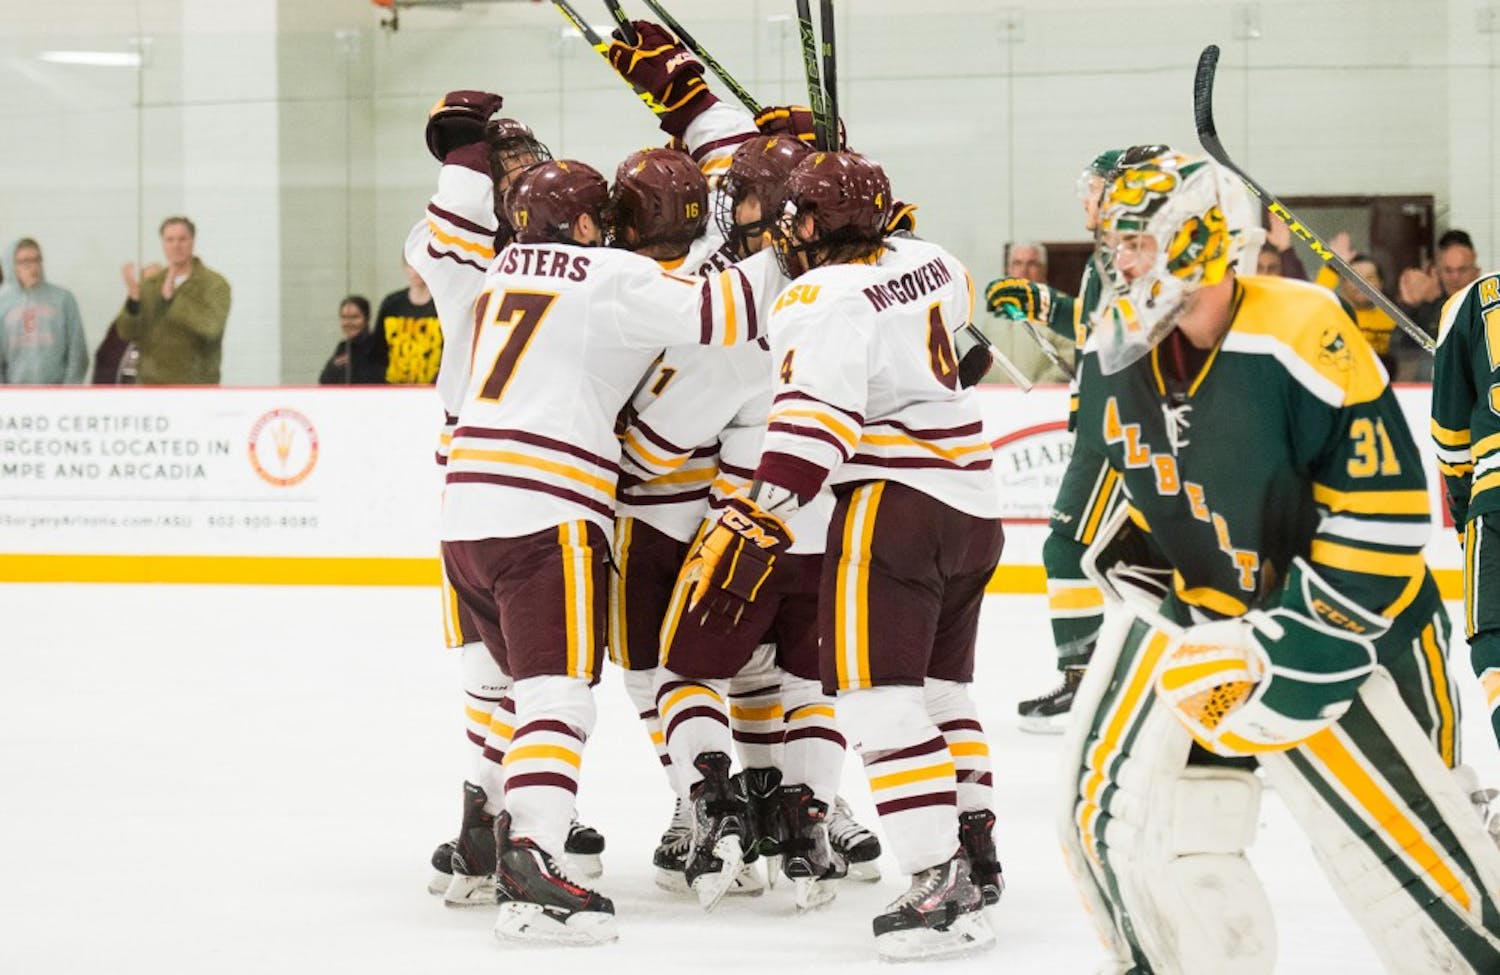 The ASU hockey team celebrates after a game-tying goal in overtime against the University of Alberta on Friday, Dec. 4, 2015, at Oceanside Ice Arena in Tempe. The Sun Devils defeated the Golden Bears 5-4 in a shootout.